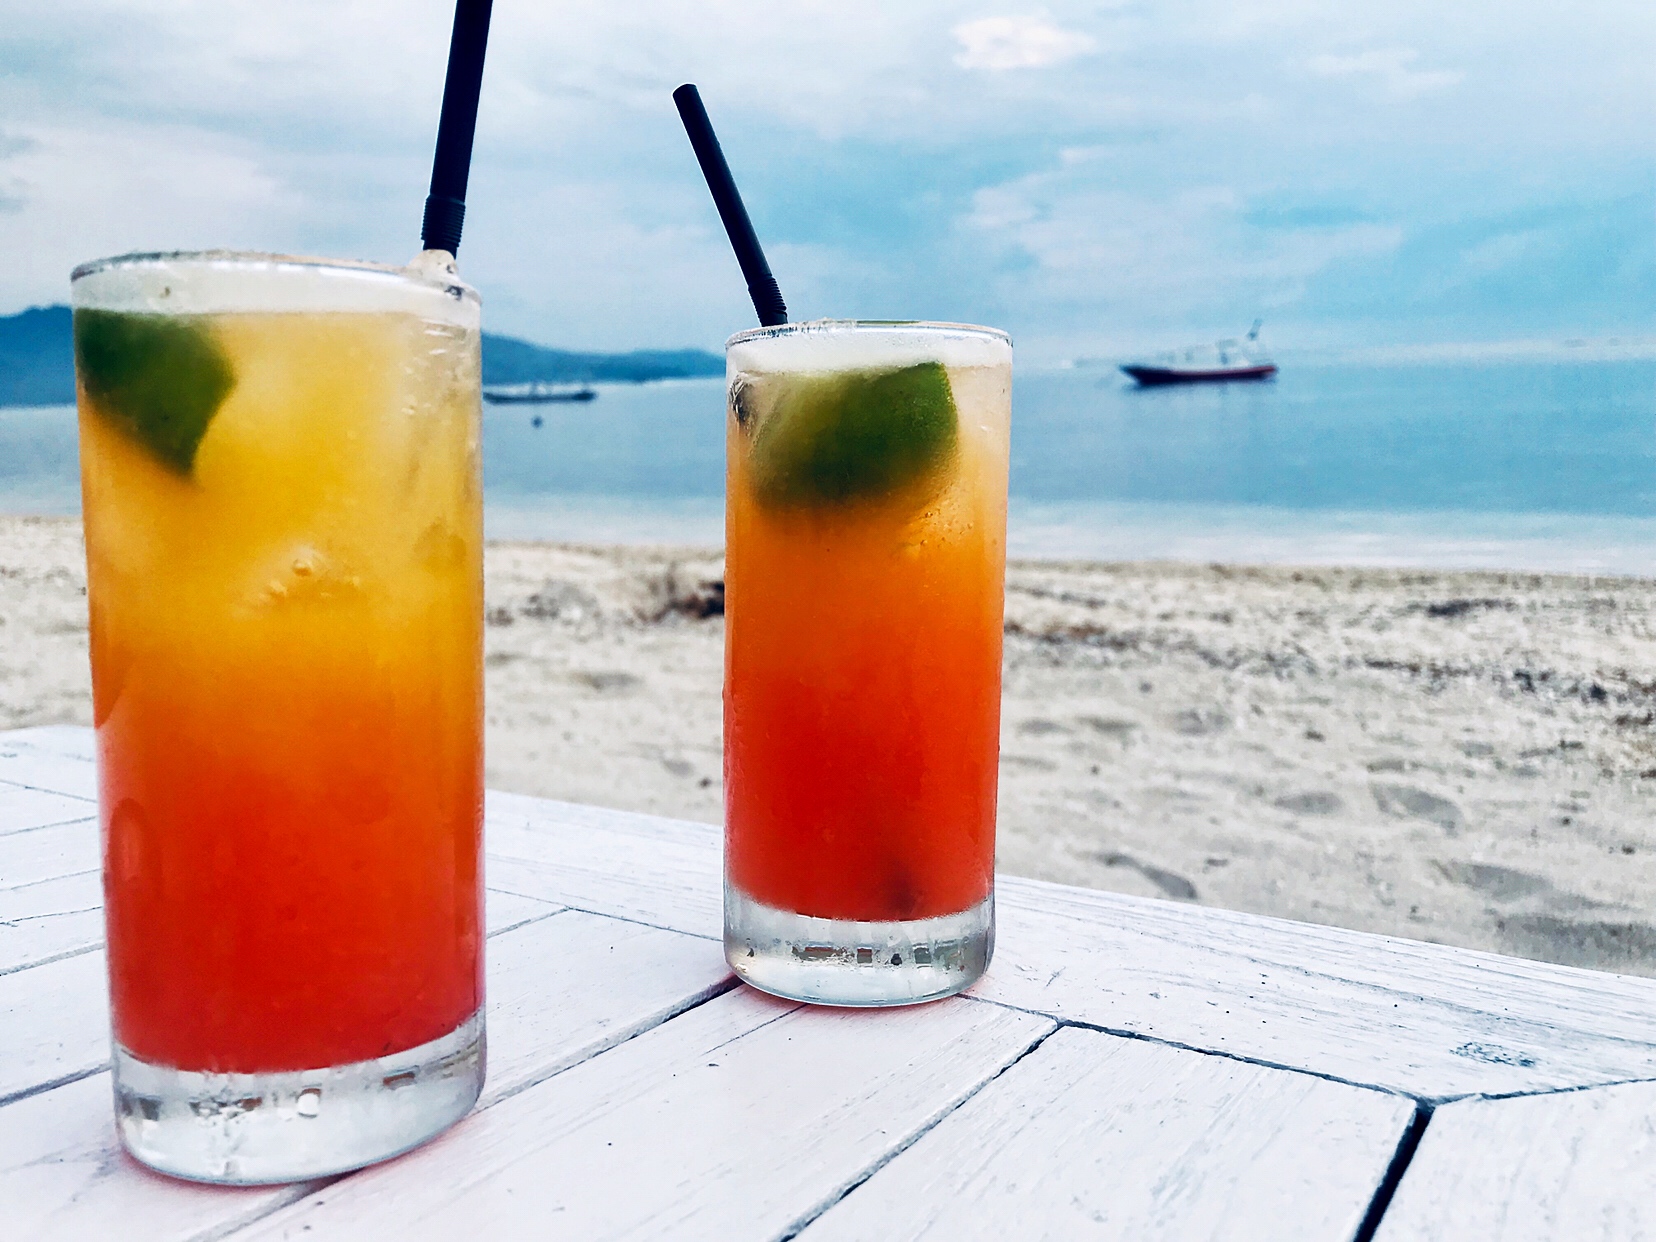 Best Gili Air Happy Hours For The Sunset